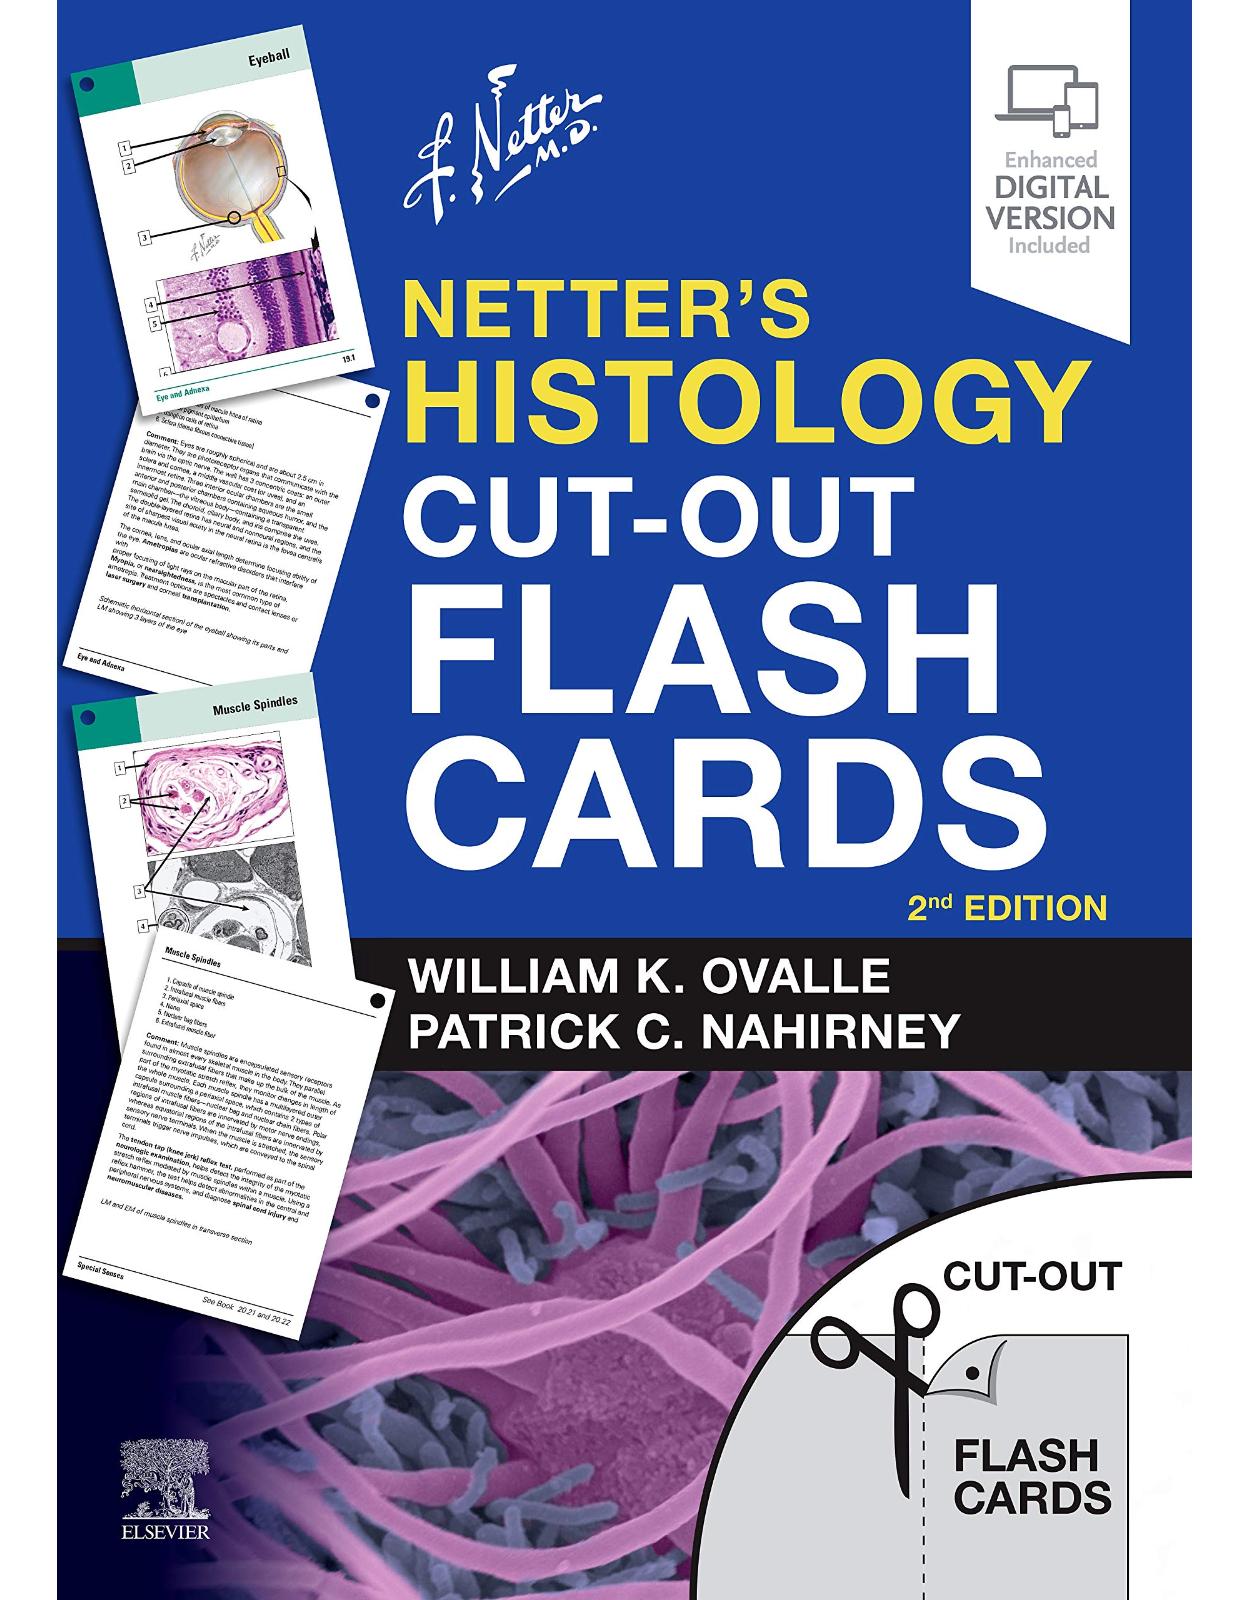 Netter's Histology Cut-Out Flash Cards: A companion to Netter's Essential Histology